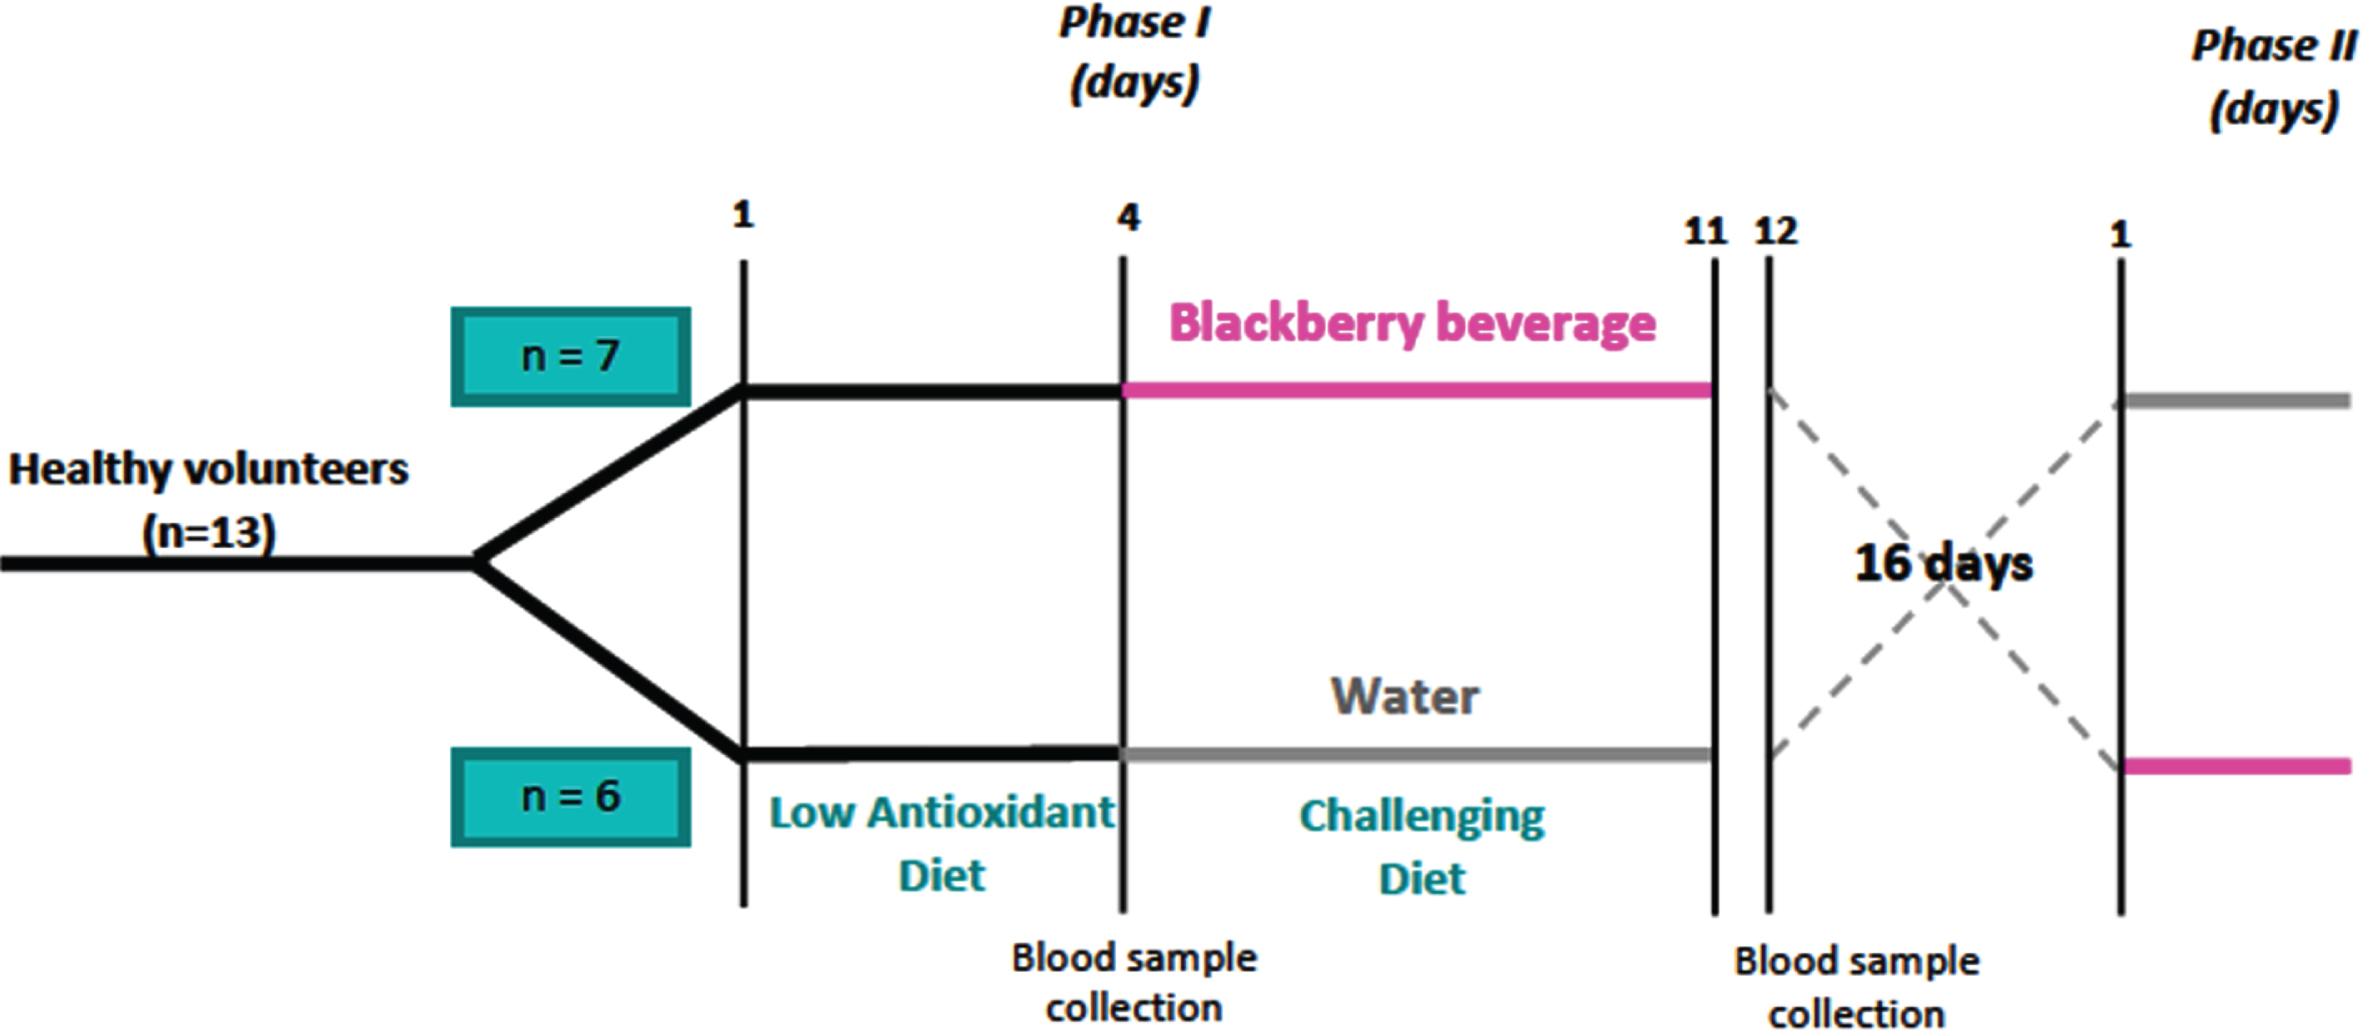 Blackberry beverage clinical trial crossover design.